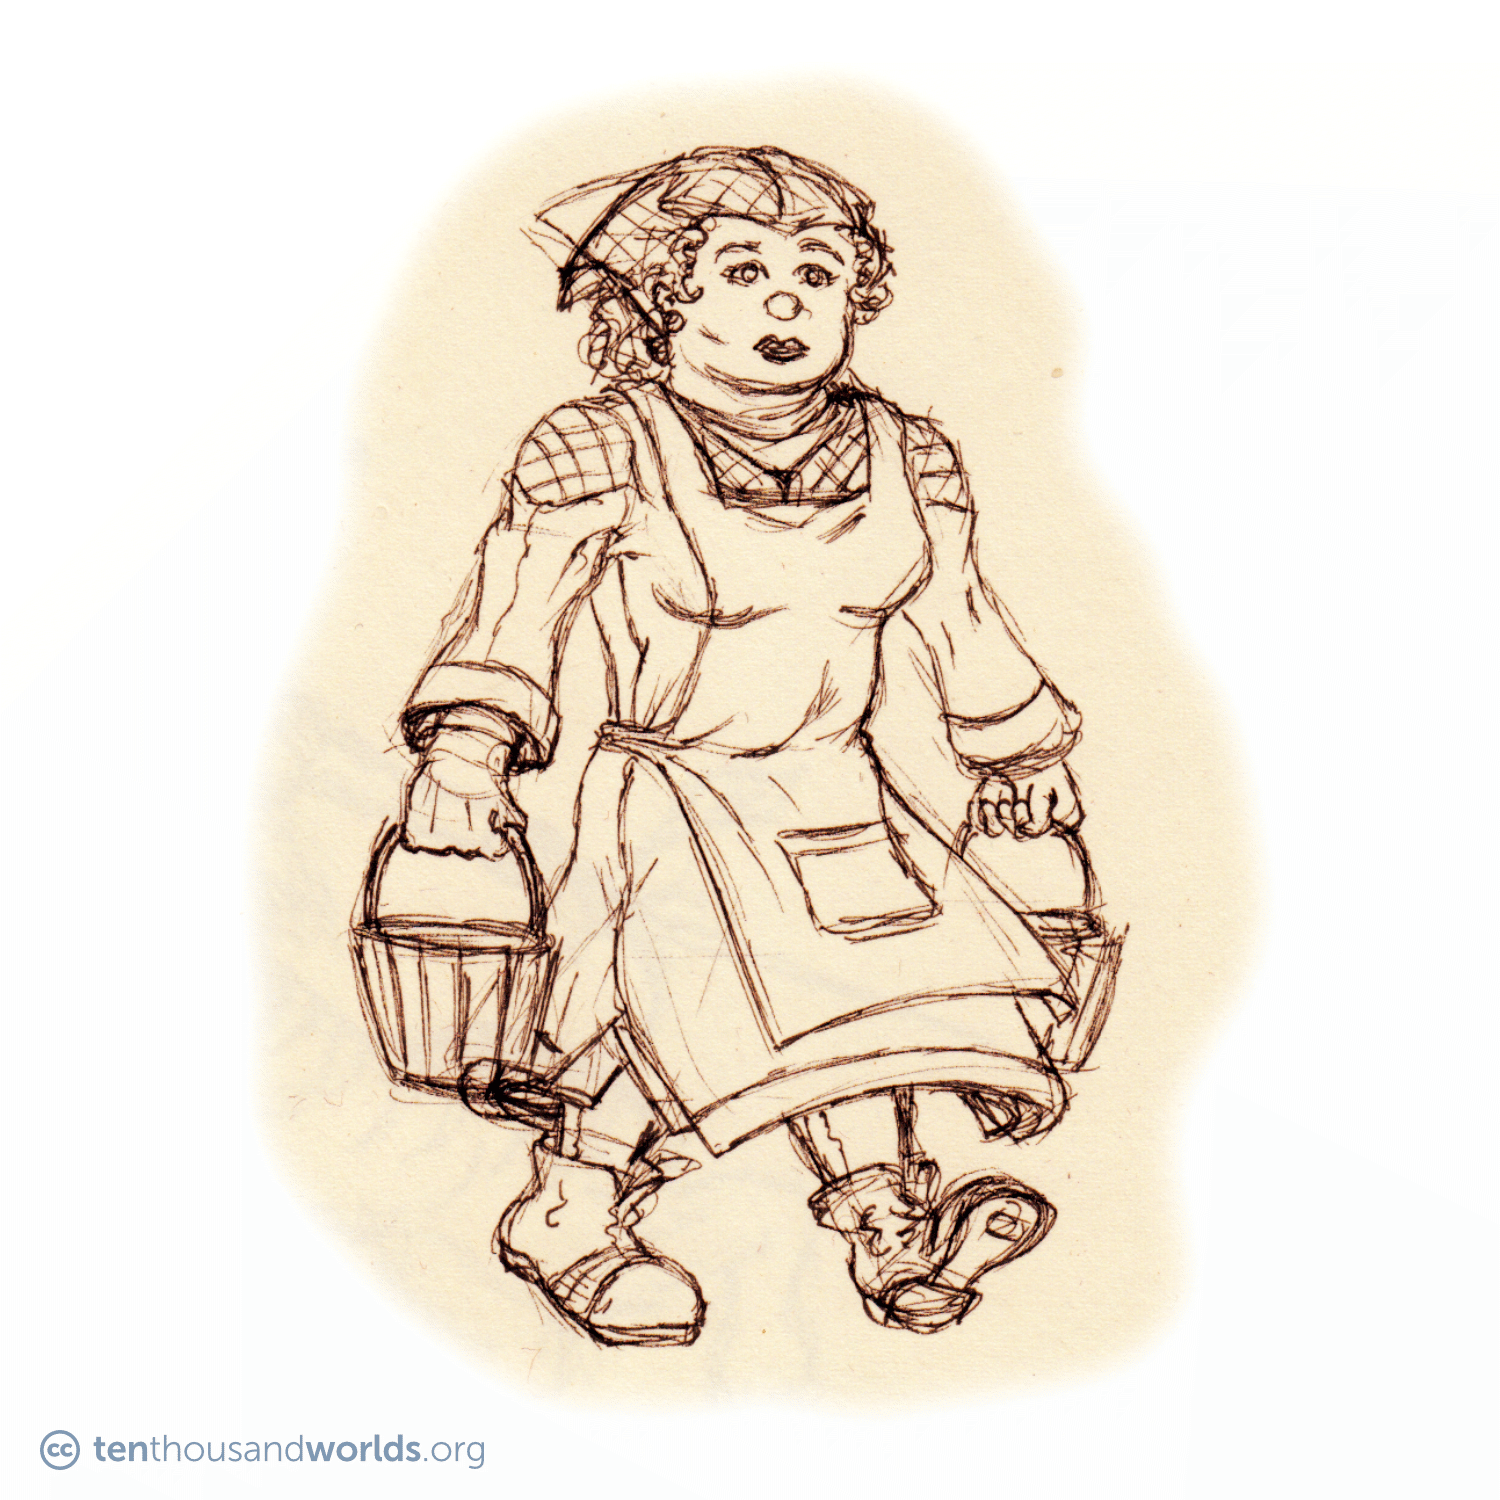 A pencil sketch of a solidly-built farm woman in a neckerchief, multilayered dress, apron, and poorly-repaired boots, hauling two wooden buckets.